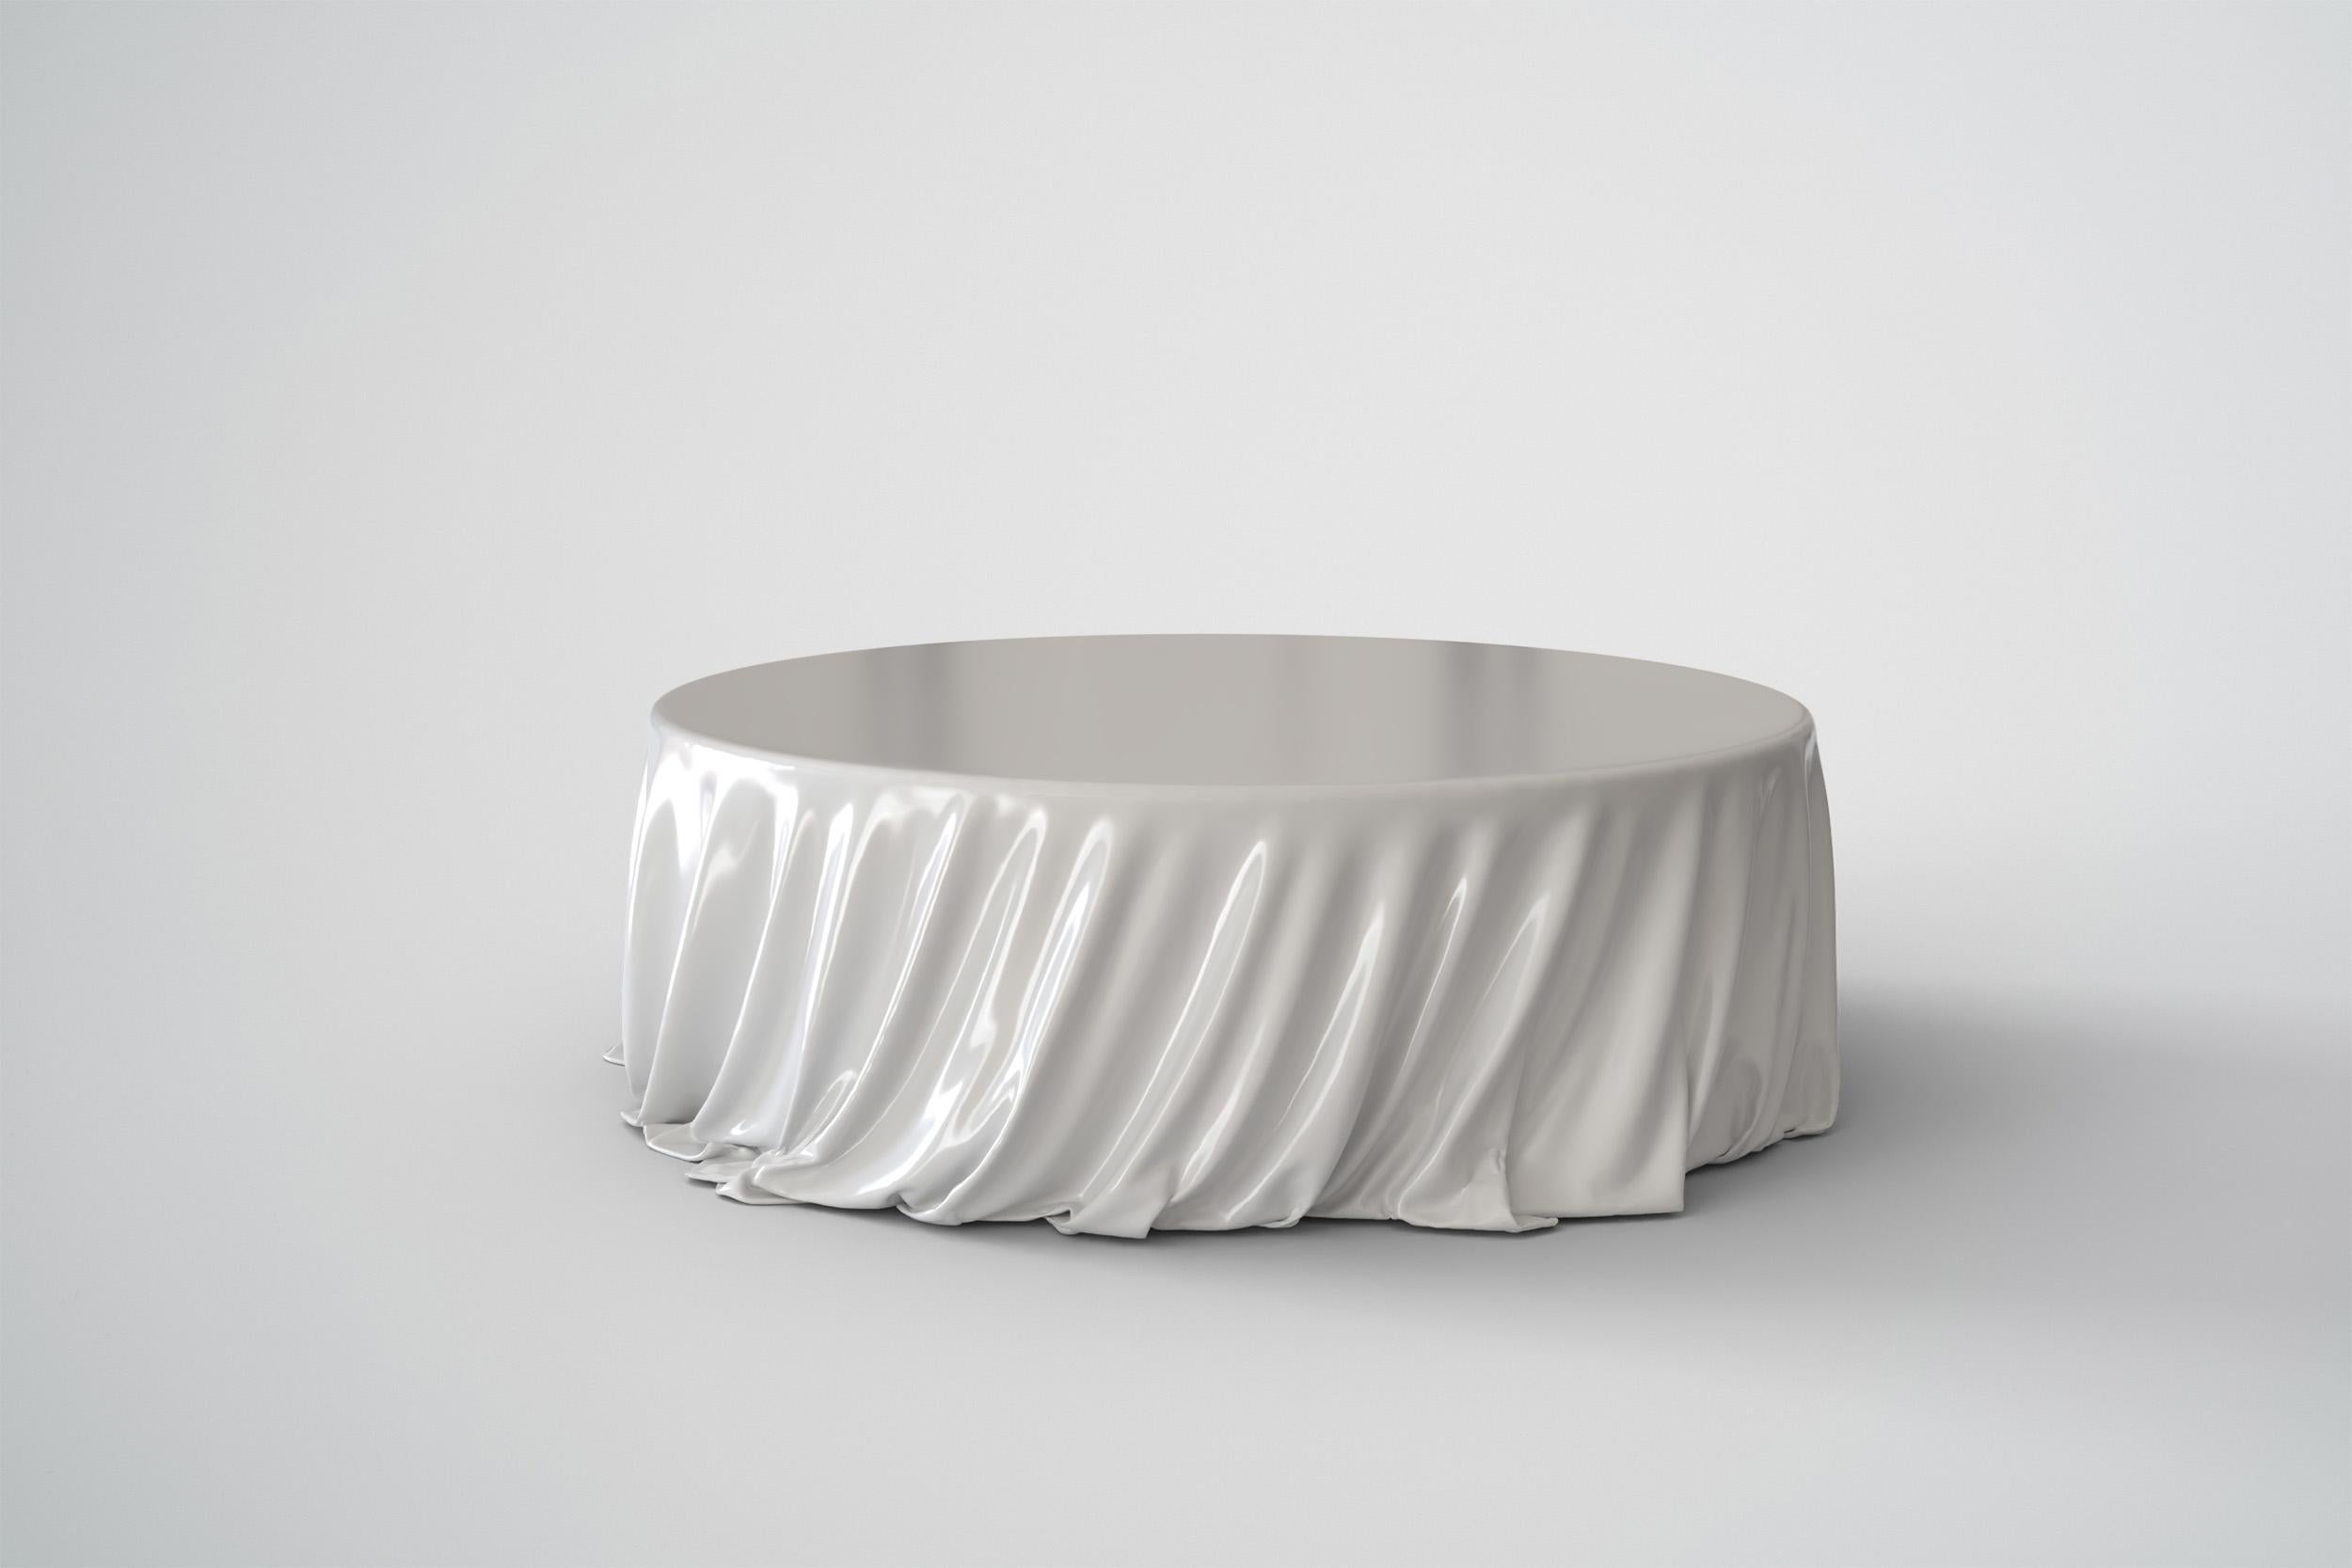 Levitaz Round Coffee Table in White Gloss For Sale 2